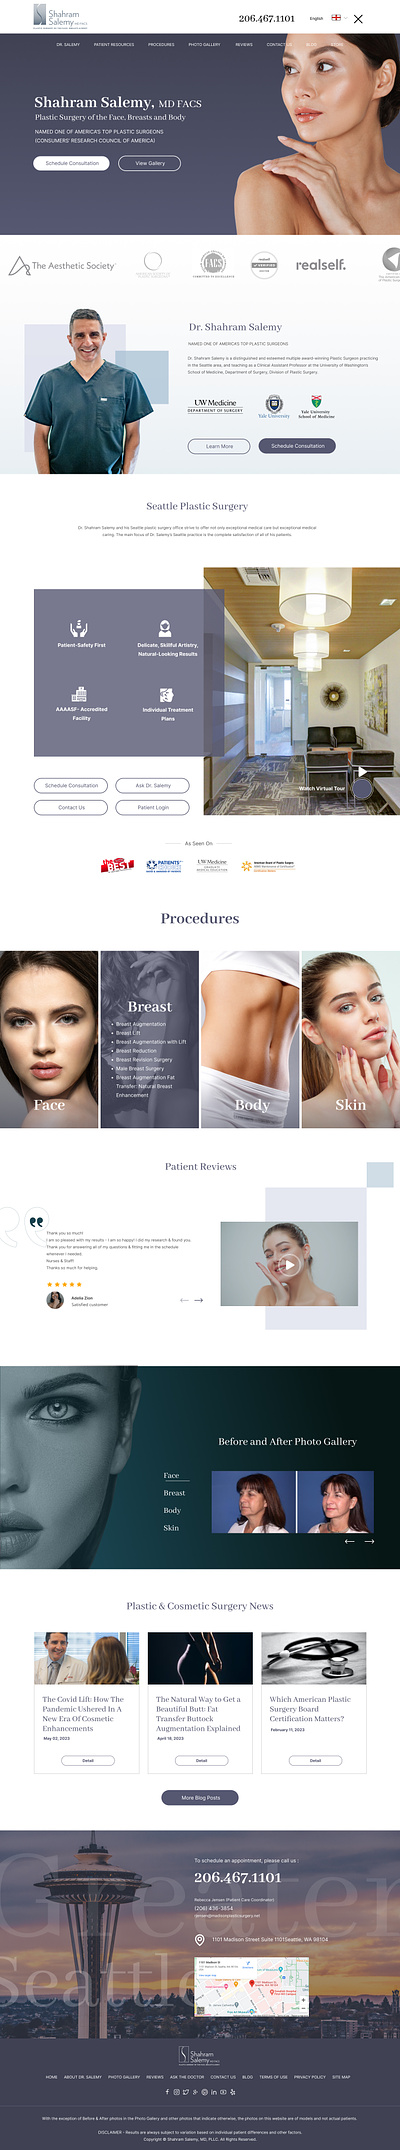 Landing Page Redesign for a Plastic Surgery Clinic beauty branding design landing page design plastic surgery skincare ui web design